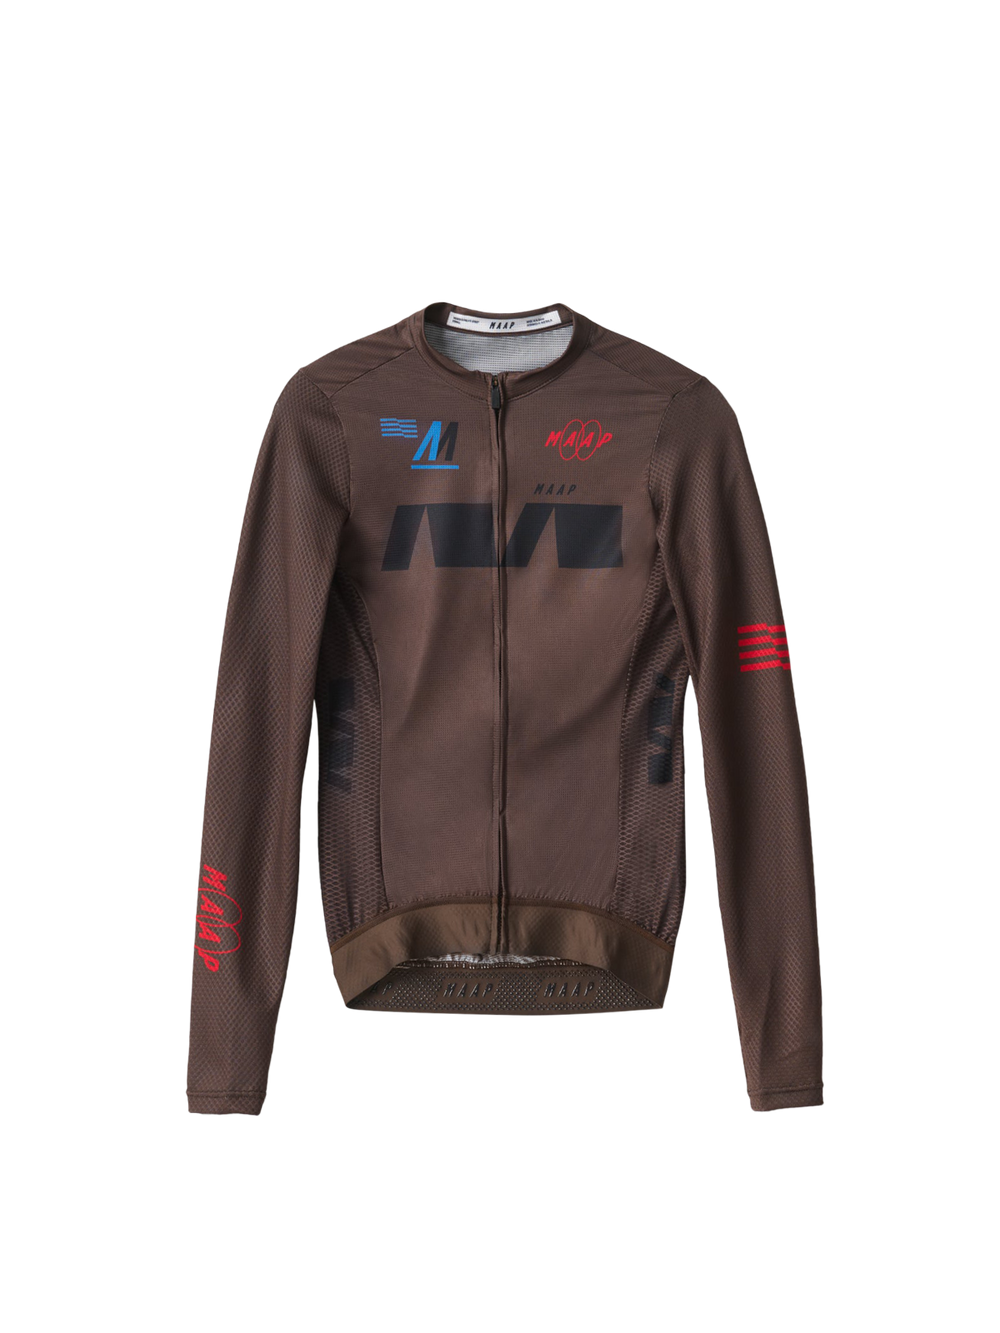 Product Image for Women's Trace Pro Air LS Jersey